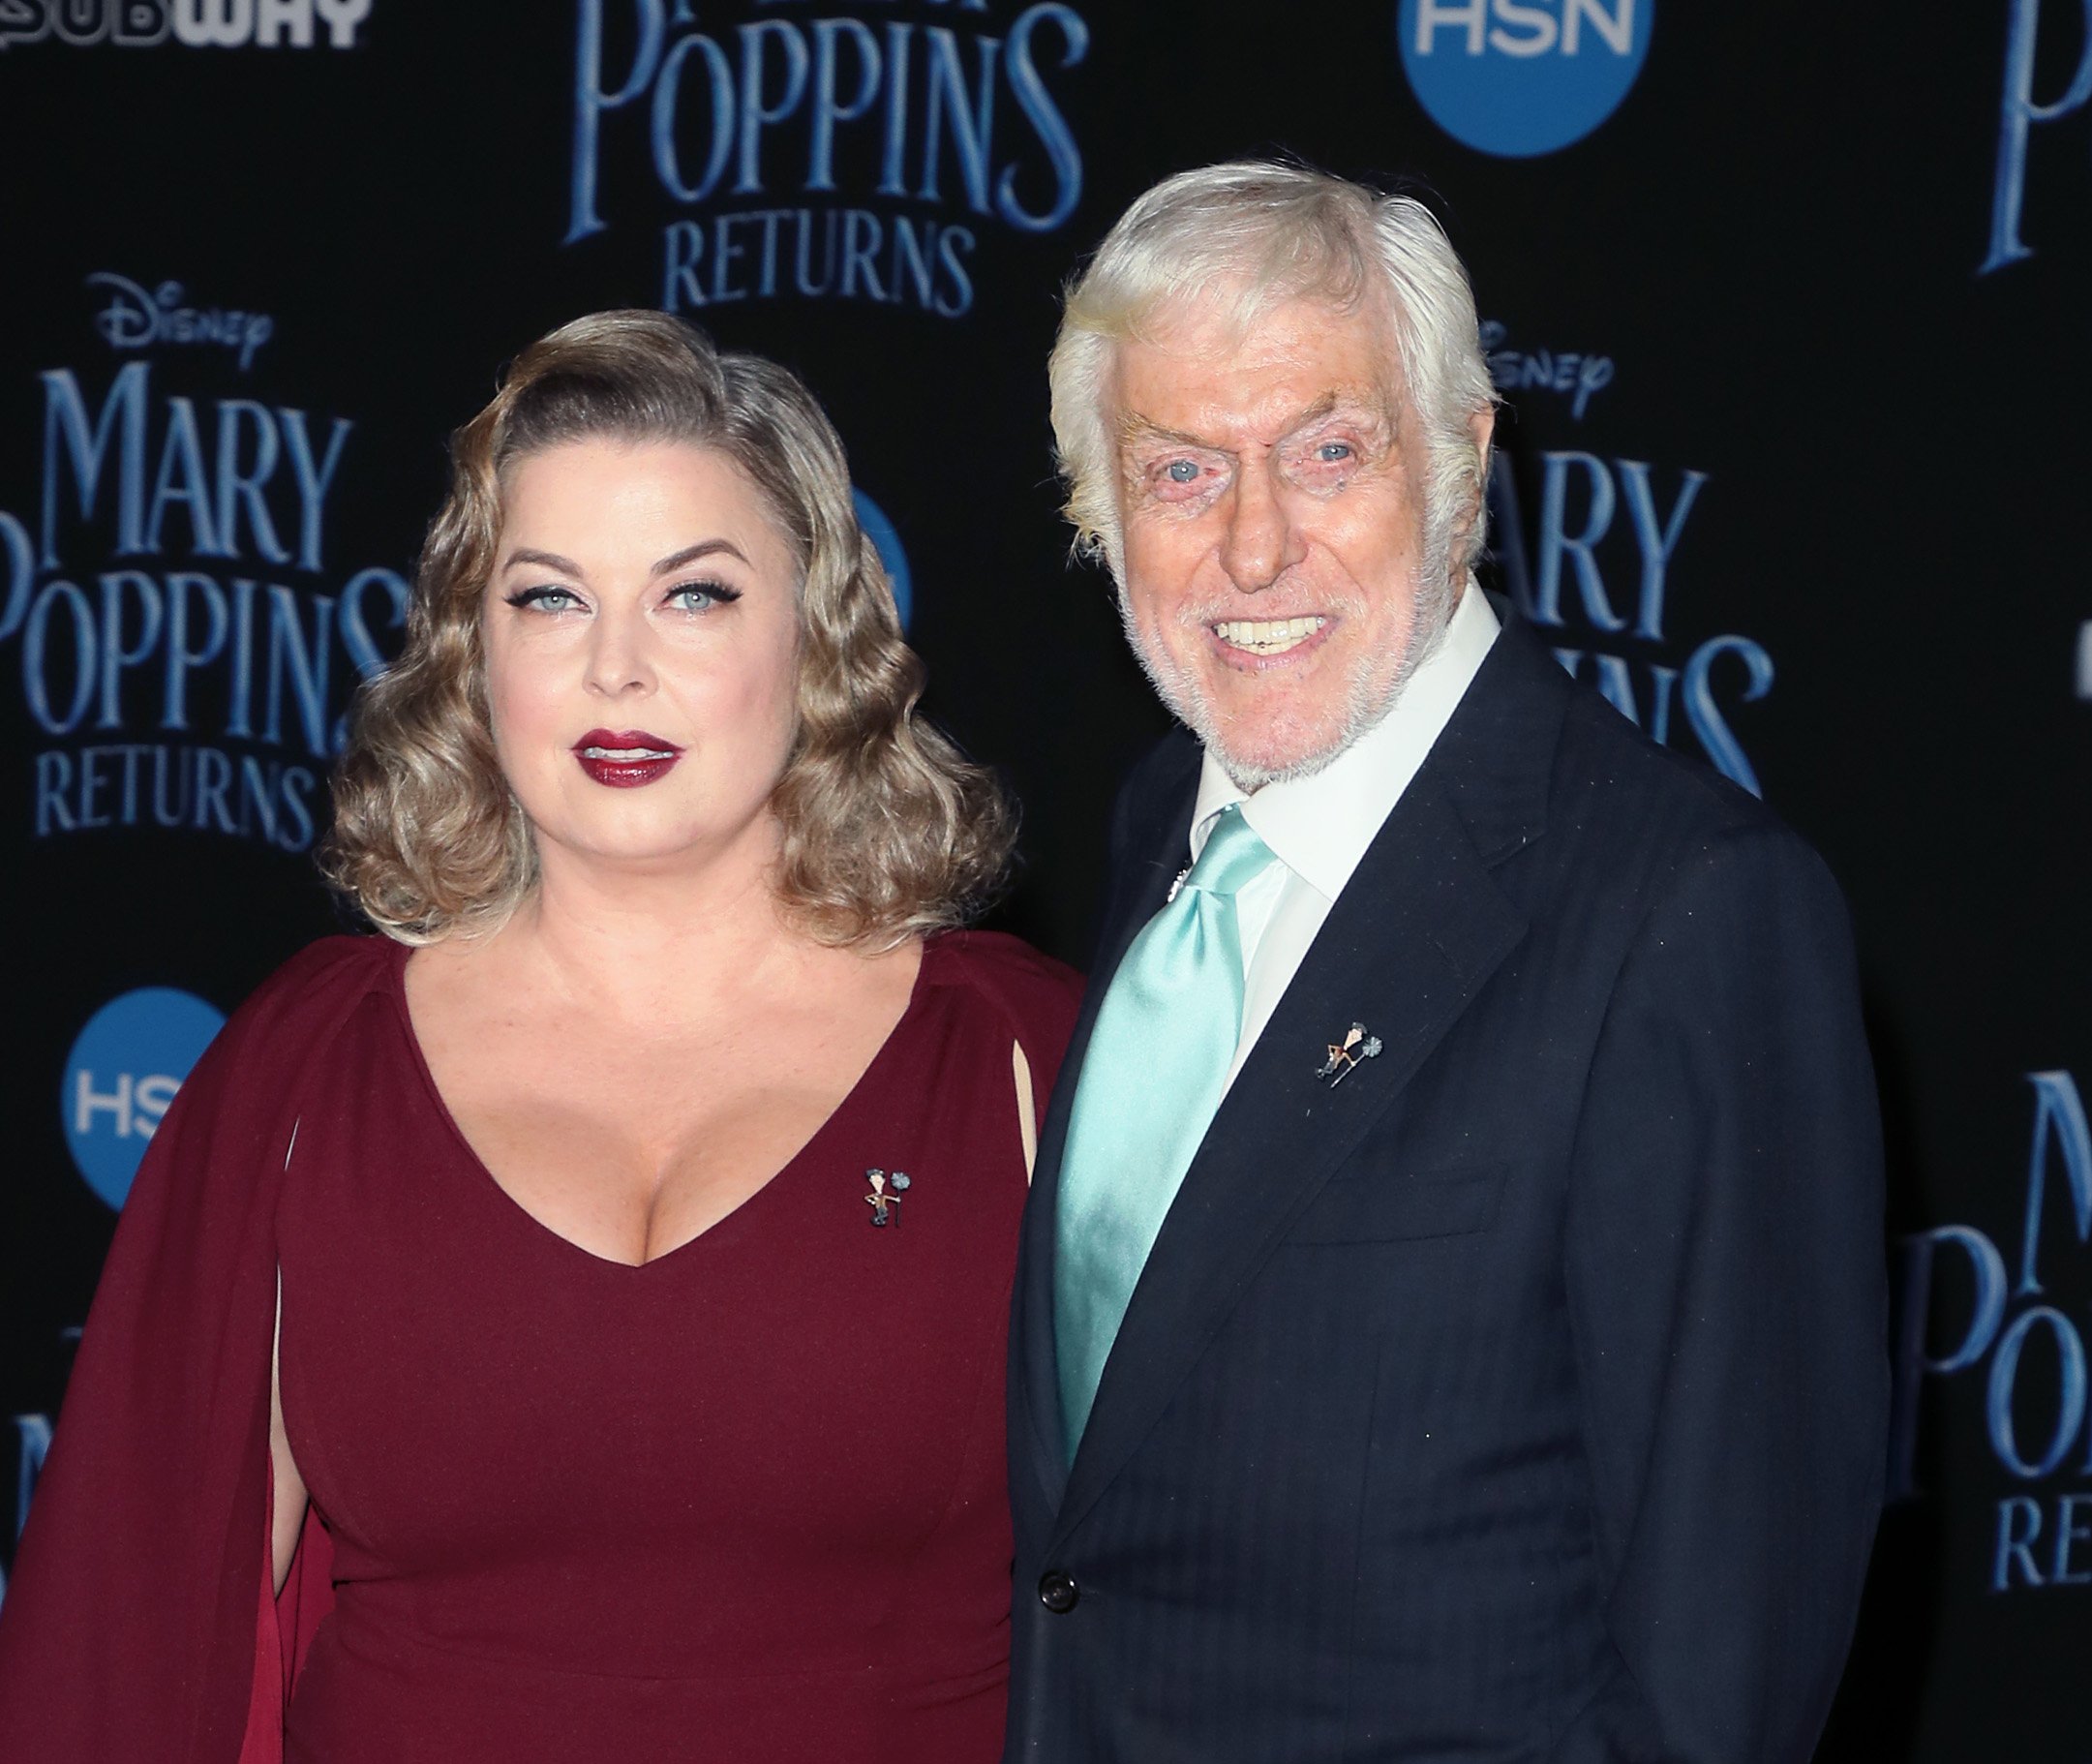 Actor Dick Van Dyke and his wife make-up artist, Arlene Silver attend the premiere of "Mary Poppins Returns" at the El Capitan Theatre on November 29, 2018 in Los Angeles, California | Source: Getty Images